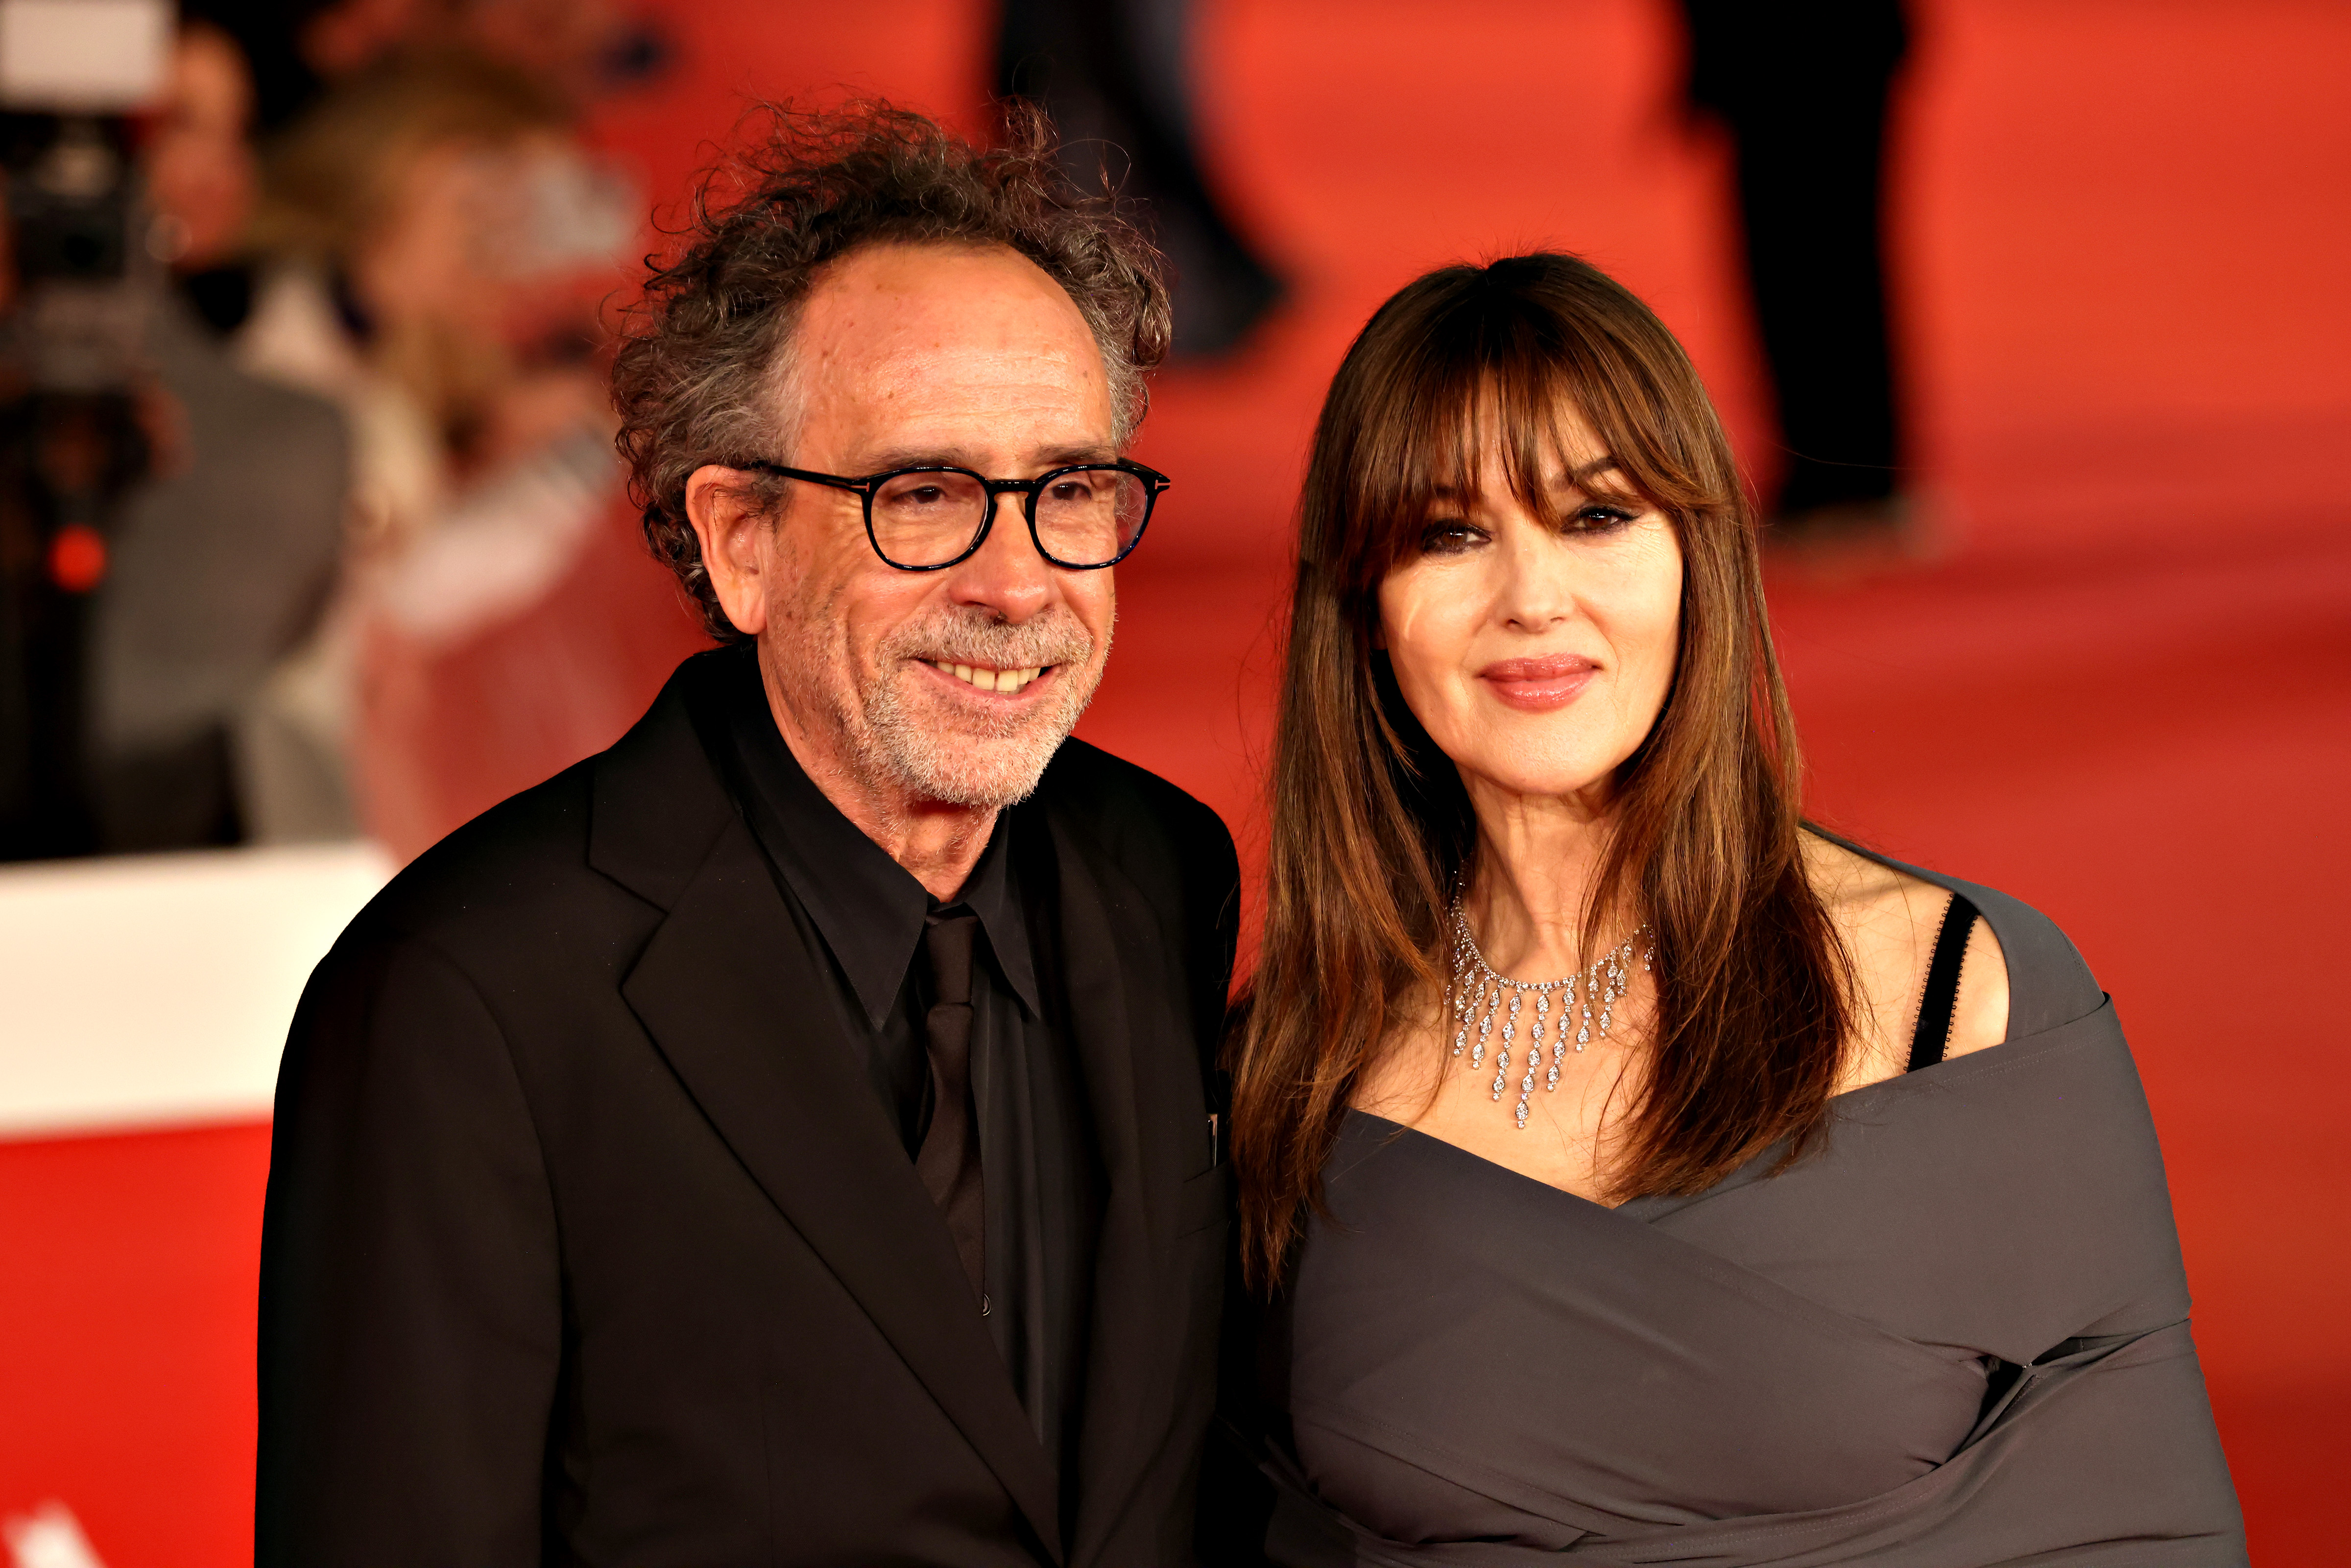 Tim Burton and Monica Bellucci at a red carpet for the movie "Diabolik Chi Sei?" in Rome, Italy on October 19, 2023 | Source: Getty Images